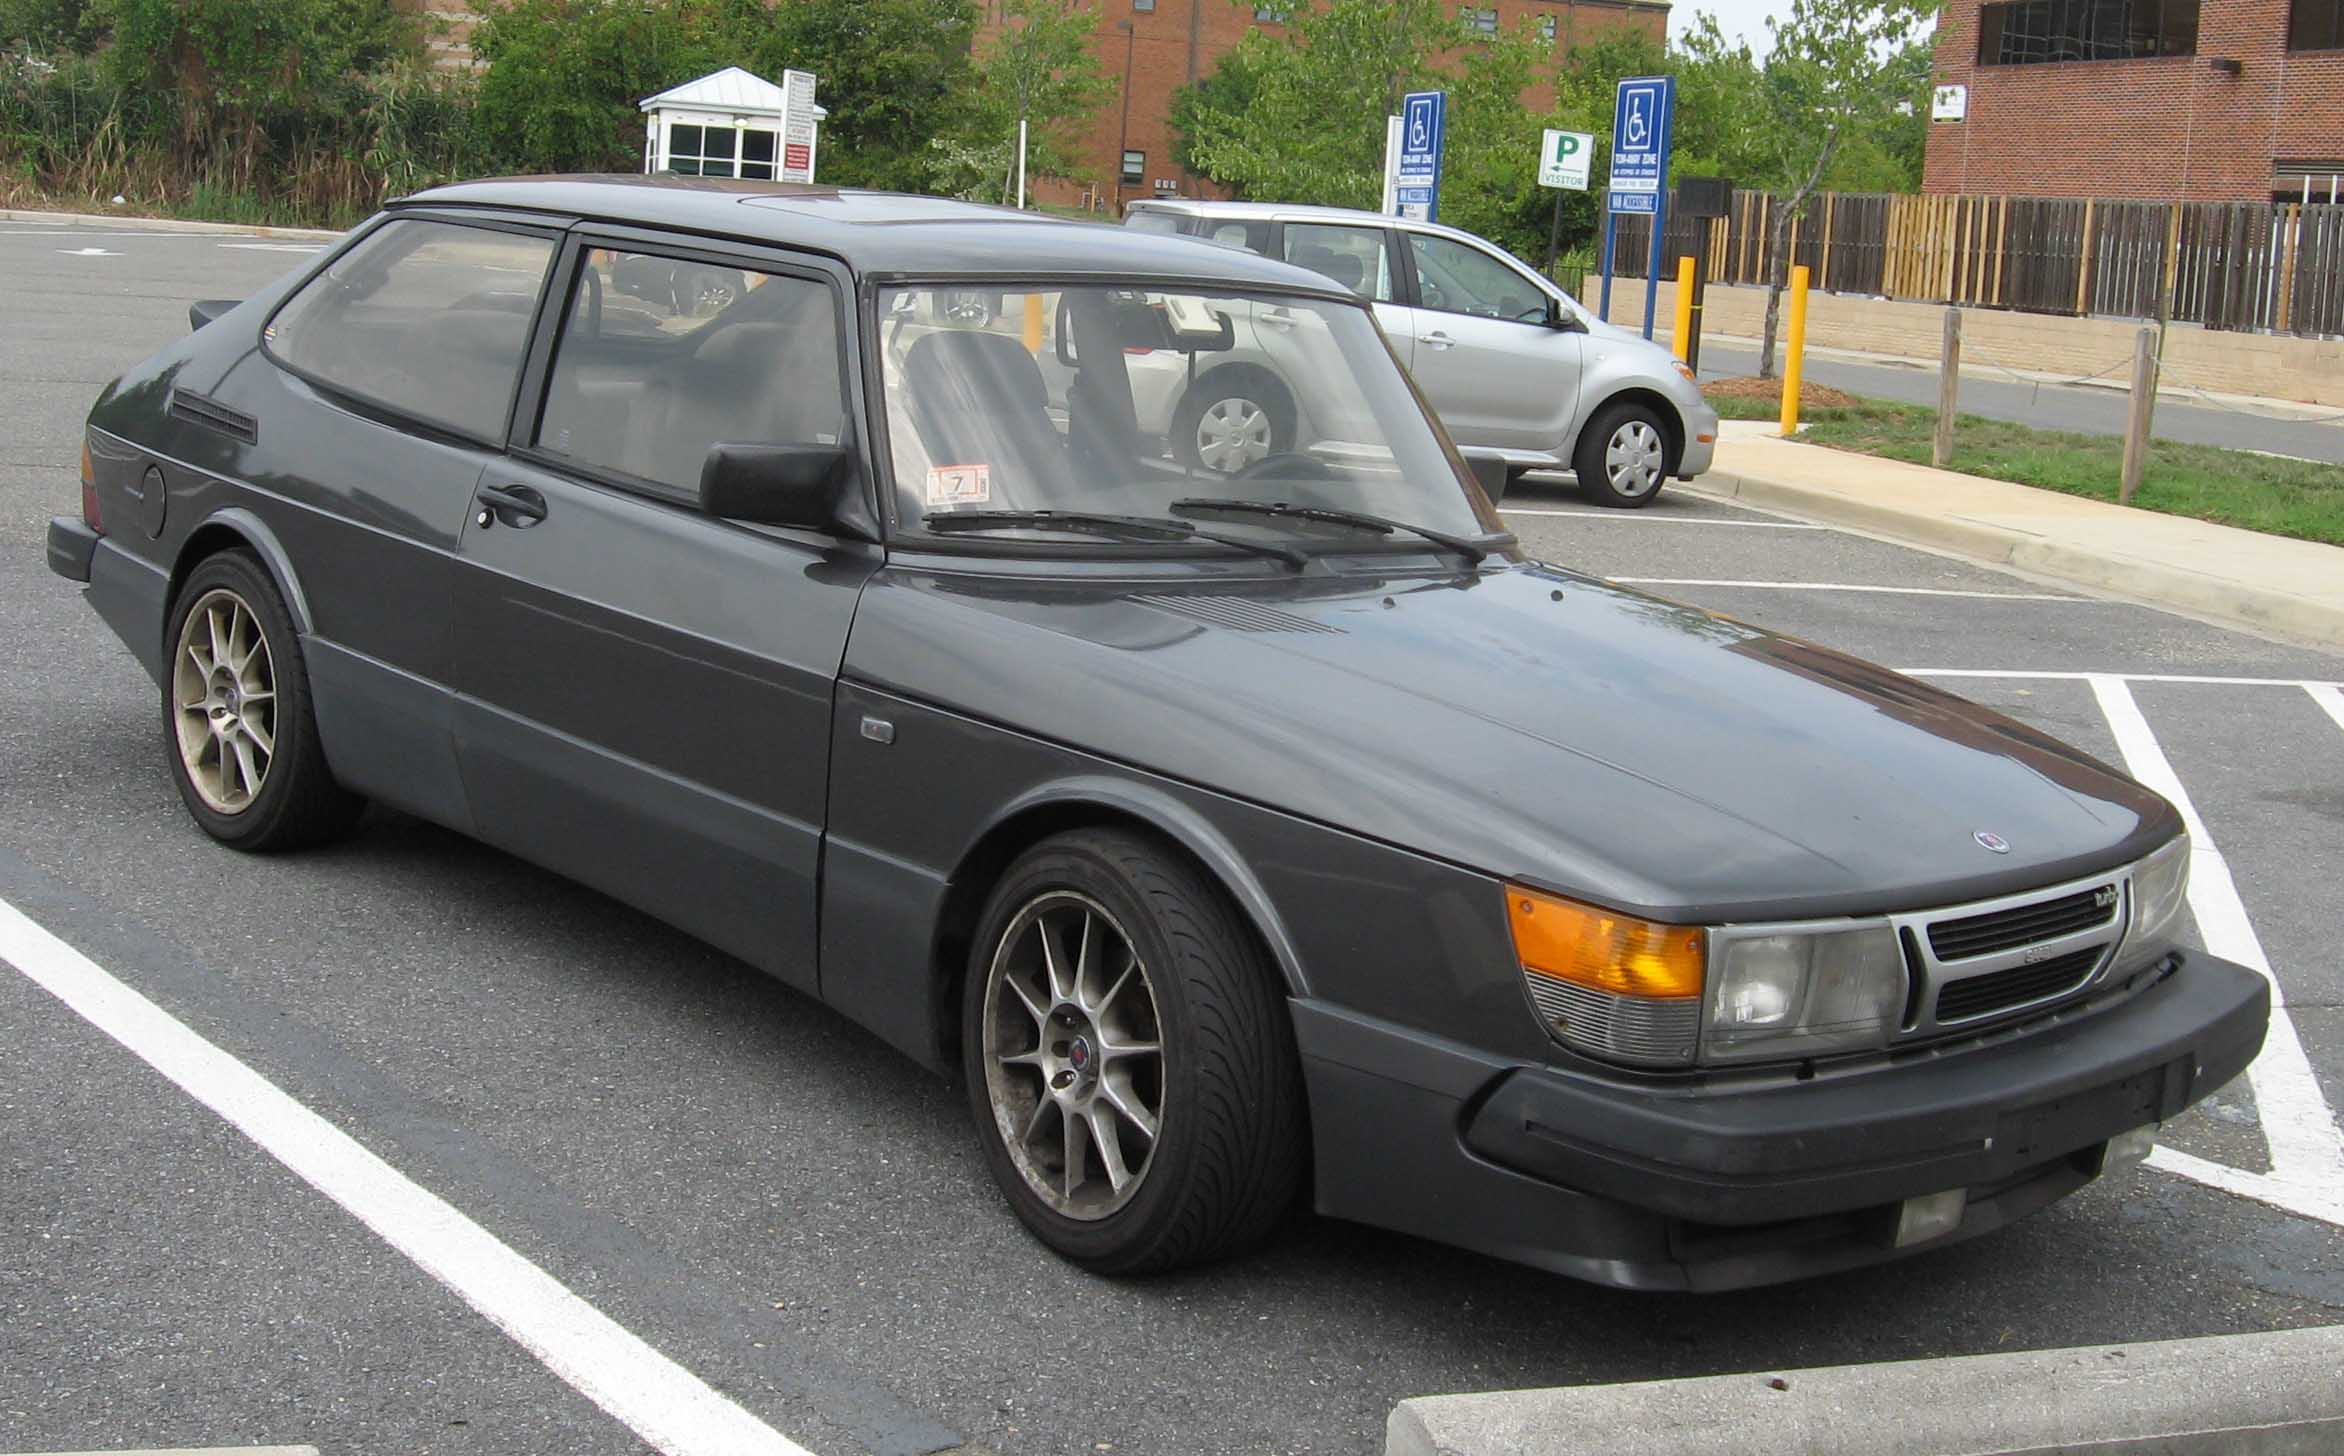 SAAB 900 Turbo Photo Gallery: Photo #02 out of 11, Image Size ...